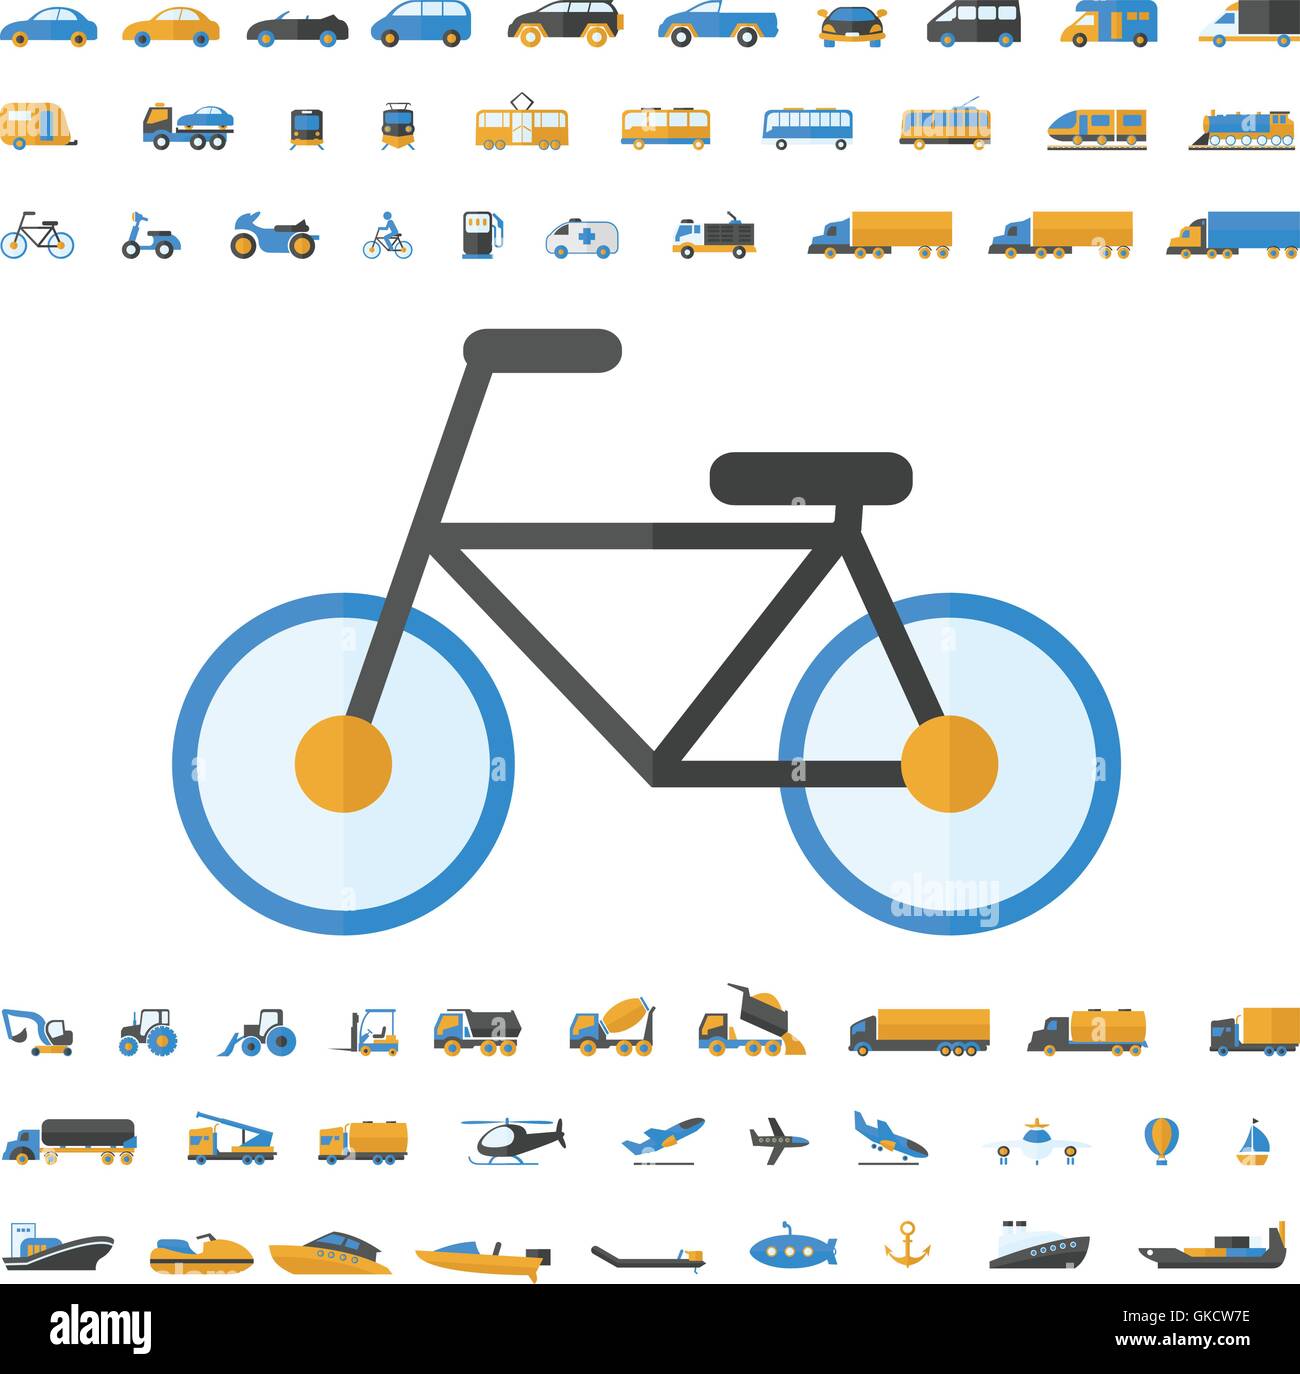 Vehicle and Transportation icon set Stock Vector